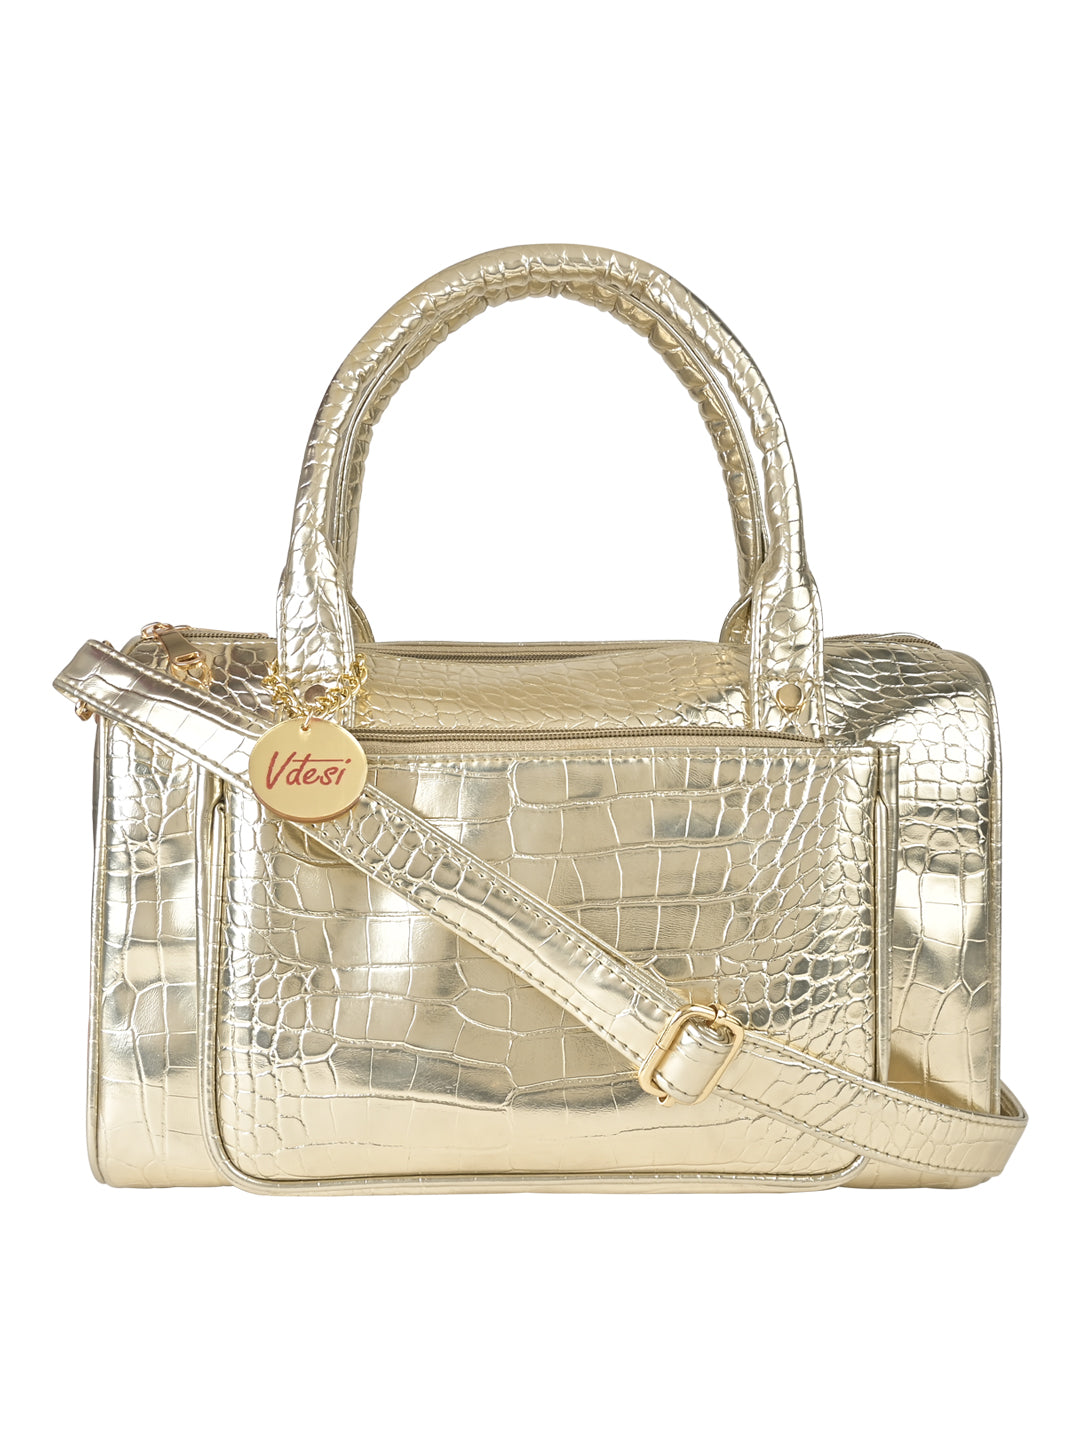 A trendy gold Croco Doctor Bag by Vdesi.